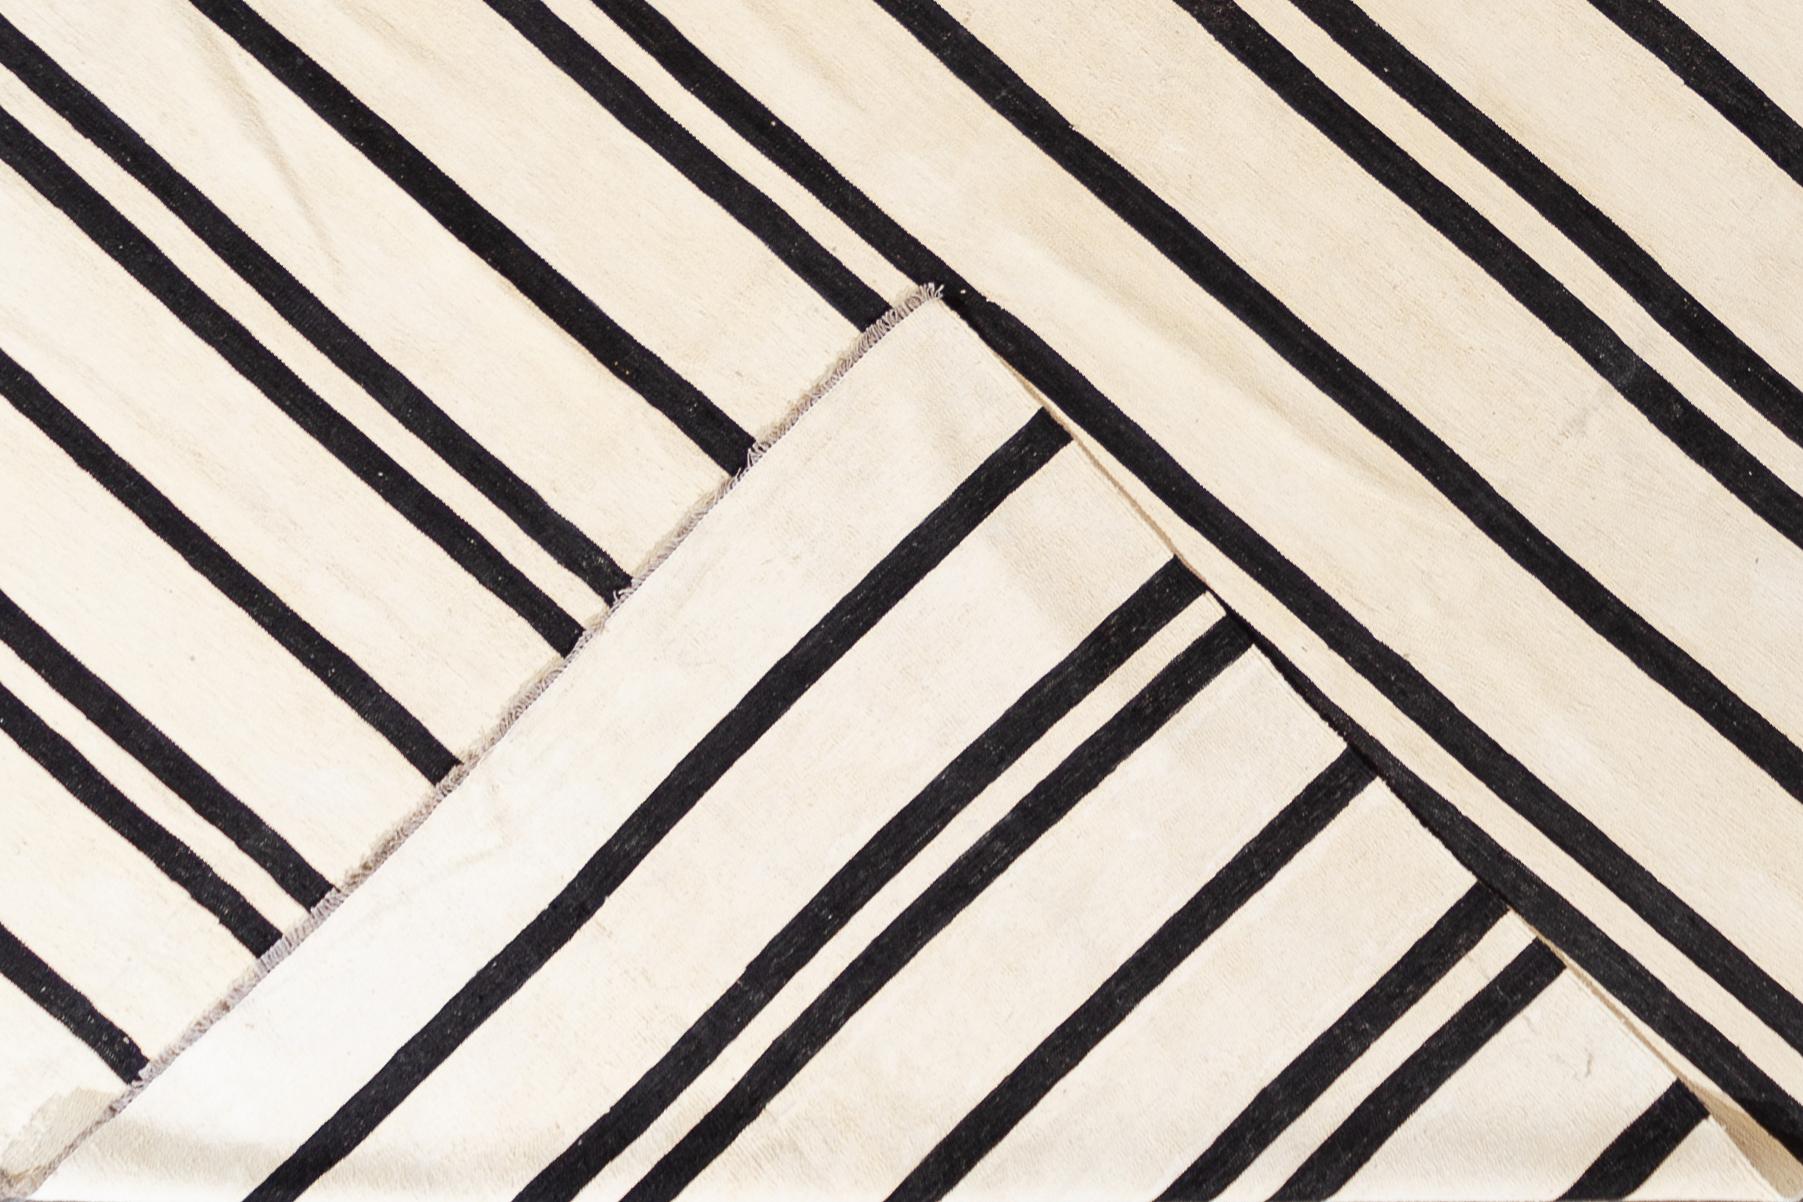 Beautiful 21st century contemporary Kilim Rug, handwoven wool in an all-over black and white striped design.
This rug measures 12' 1